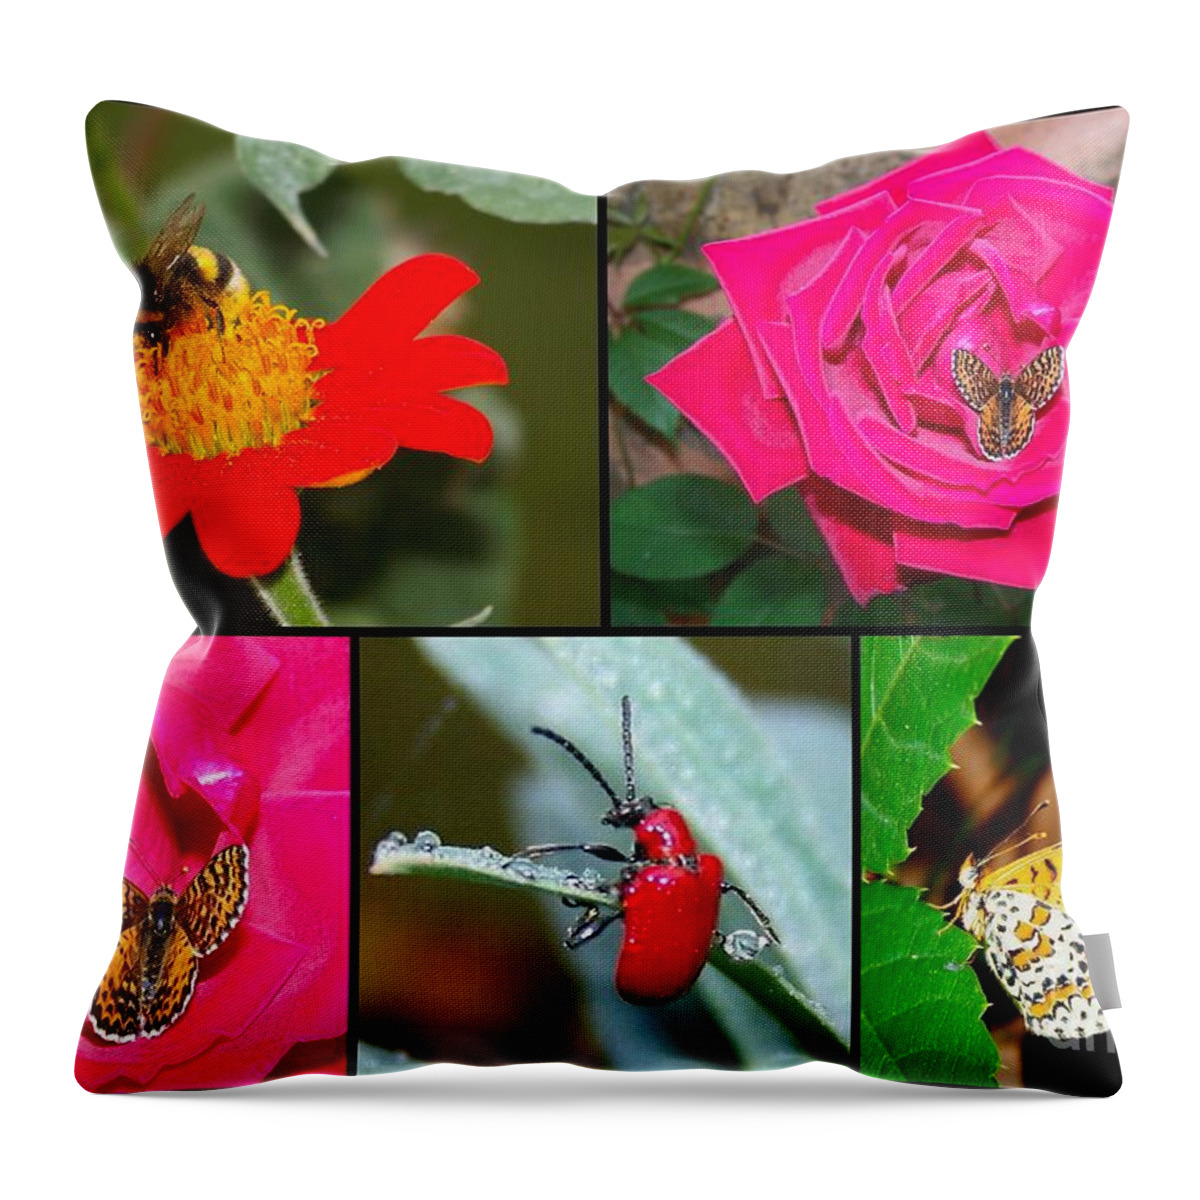 Flowers Throw Pillow featuring the photograph Flowers #2 by Sylvie Leandre